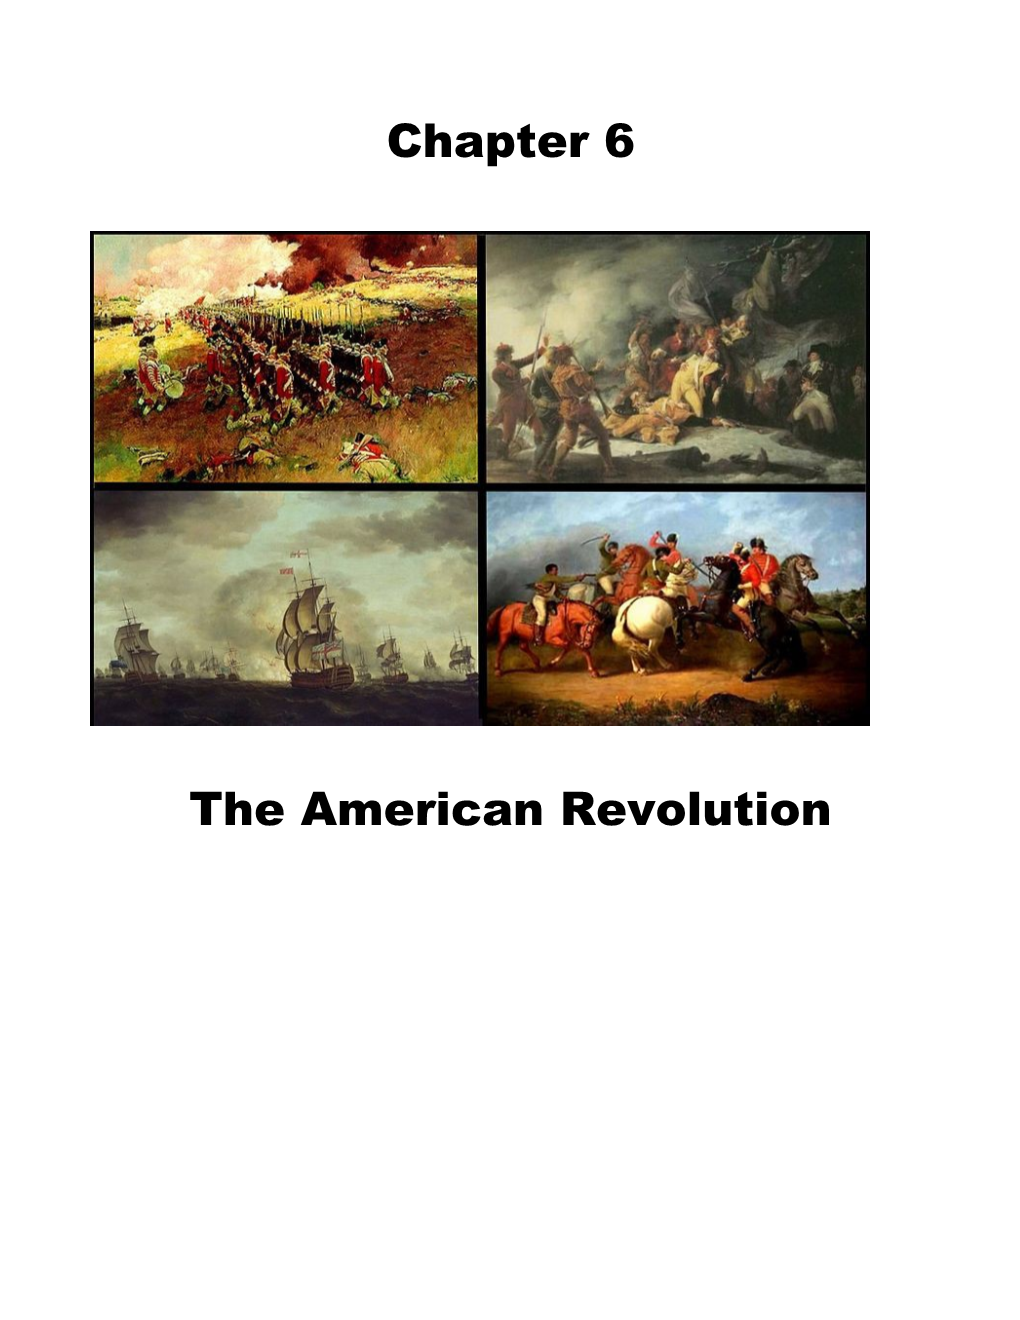 Chapter 6 the American Revolution